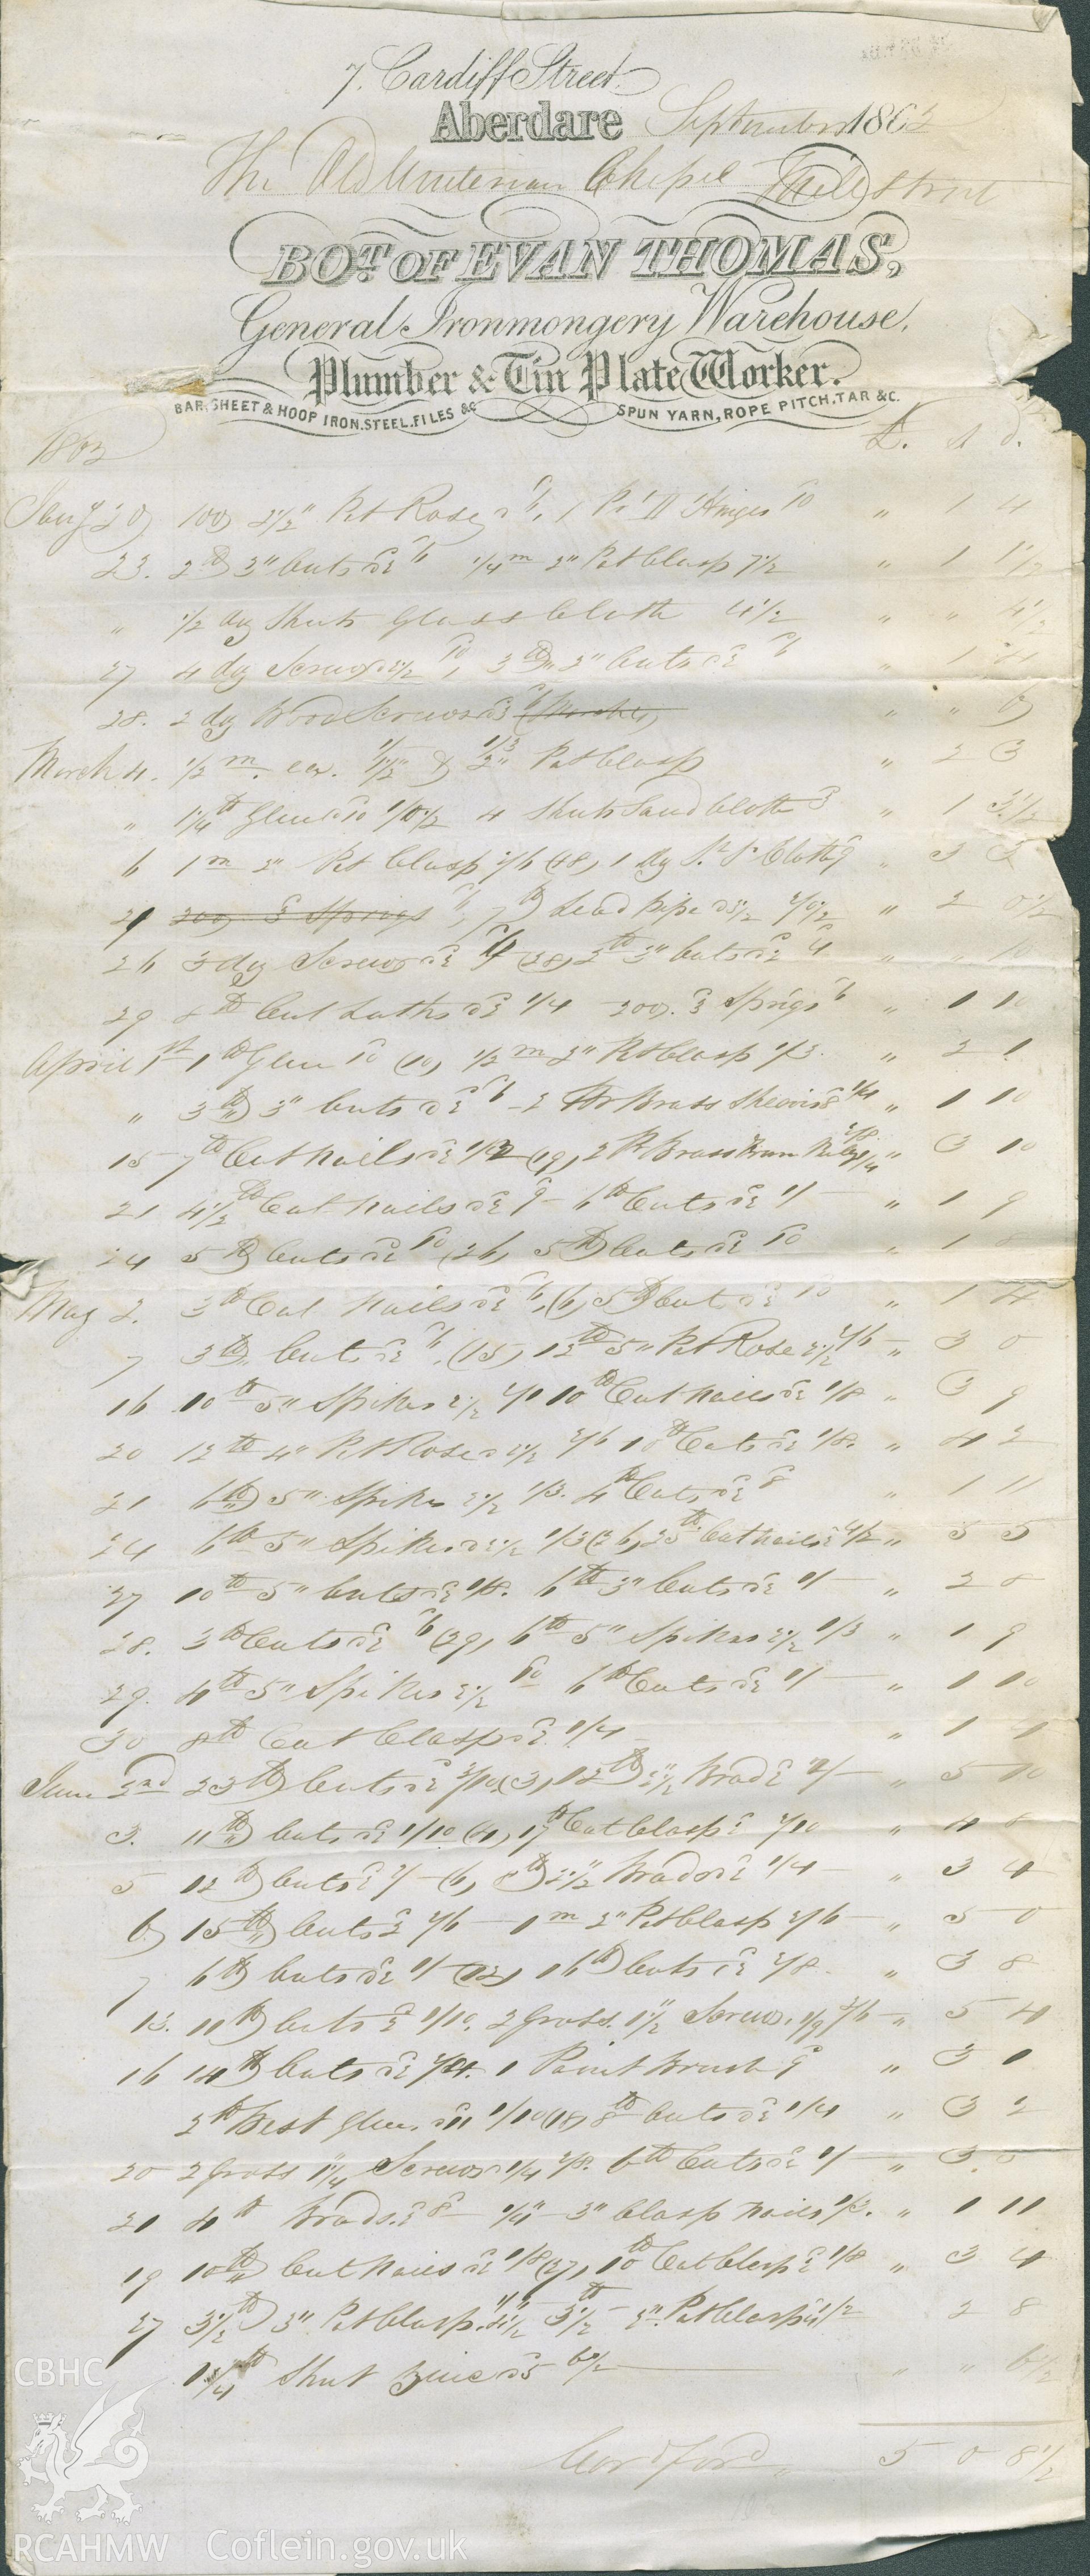 Handwritten invoice of materials from Evan Thomas for yr Hen Dy Cwrdd, Aberdare, 1863. Donated by the Rev. Eric Jones to the RCAHMW as part of the Digital Dissent Project.